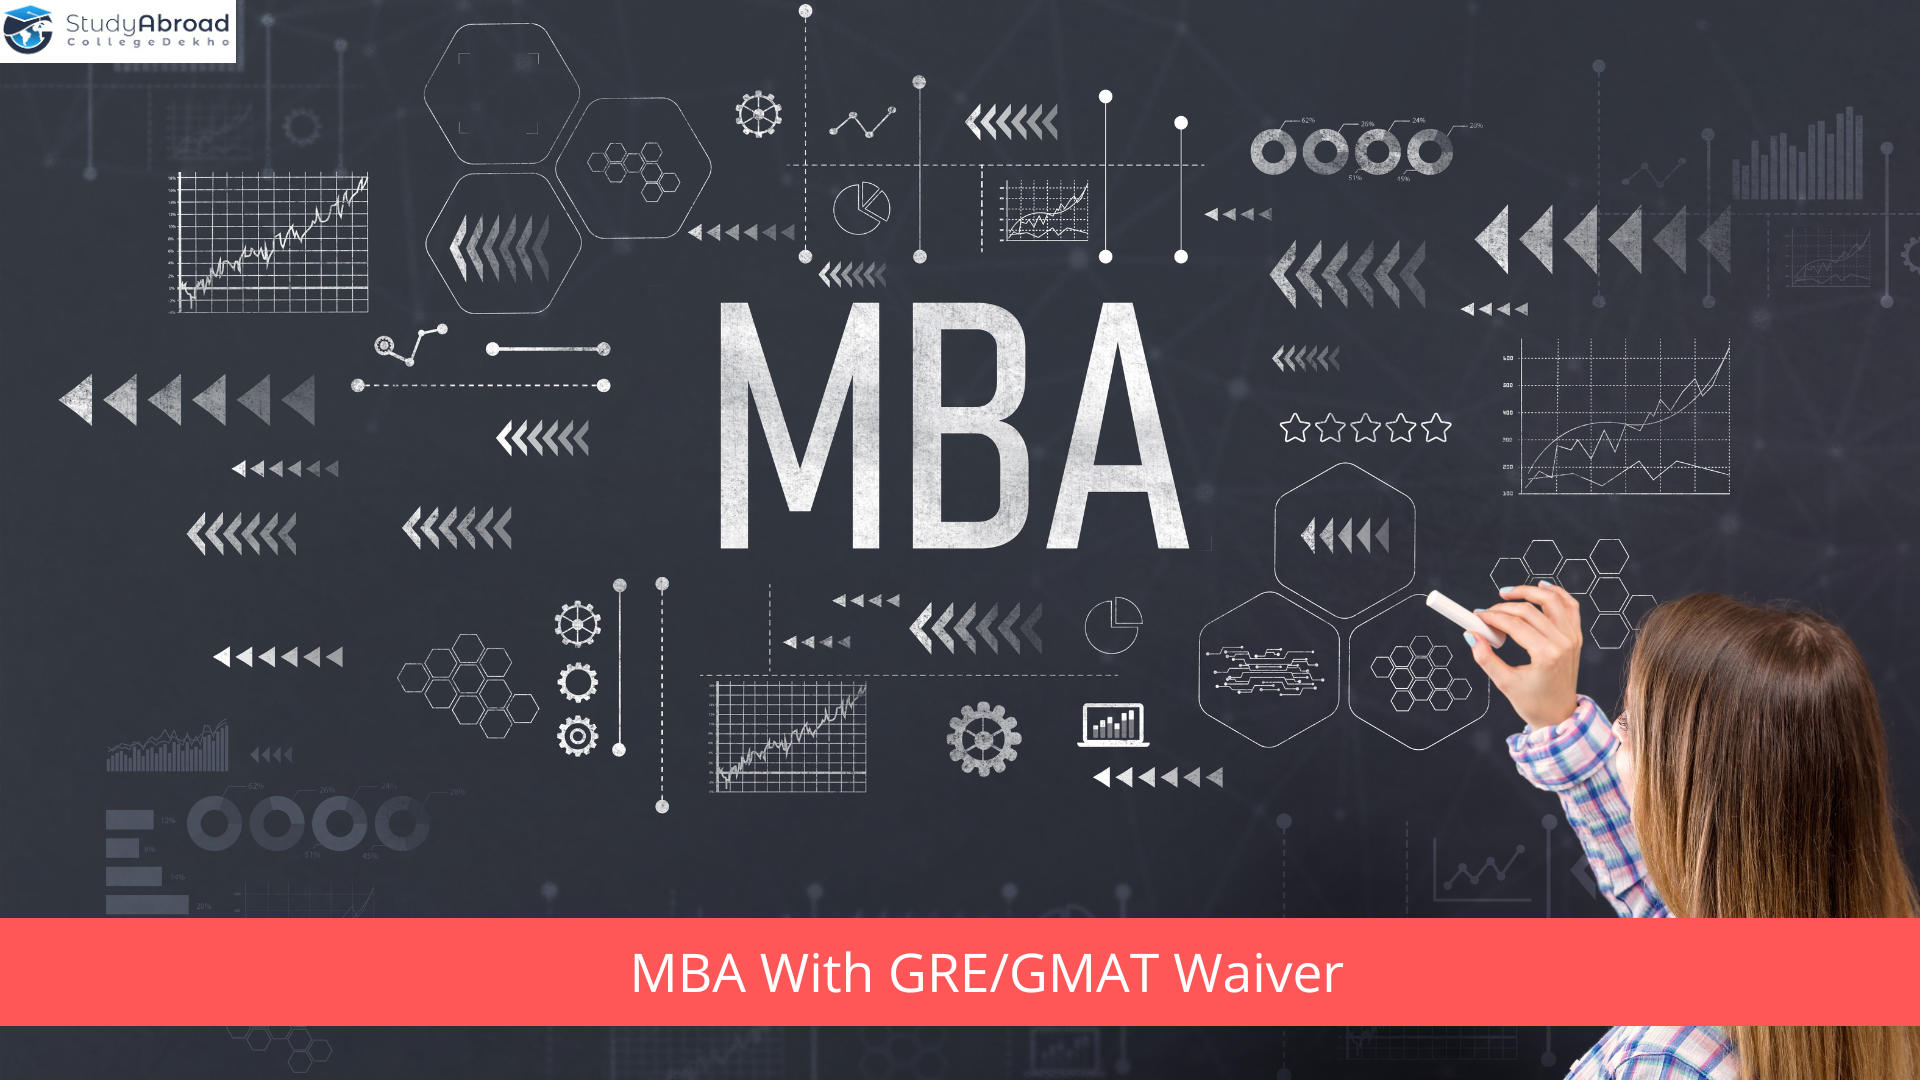 Top MBA Programs With GMAT/GRE Waiver in 2022-23